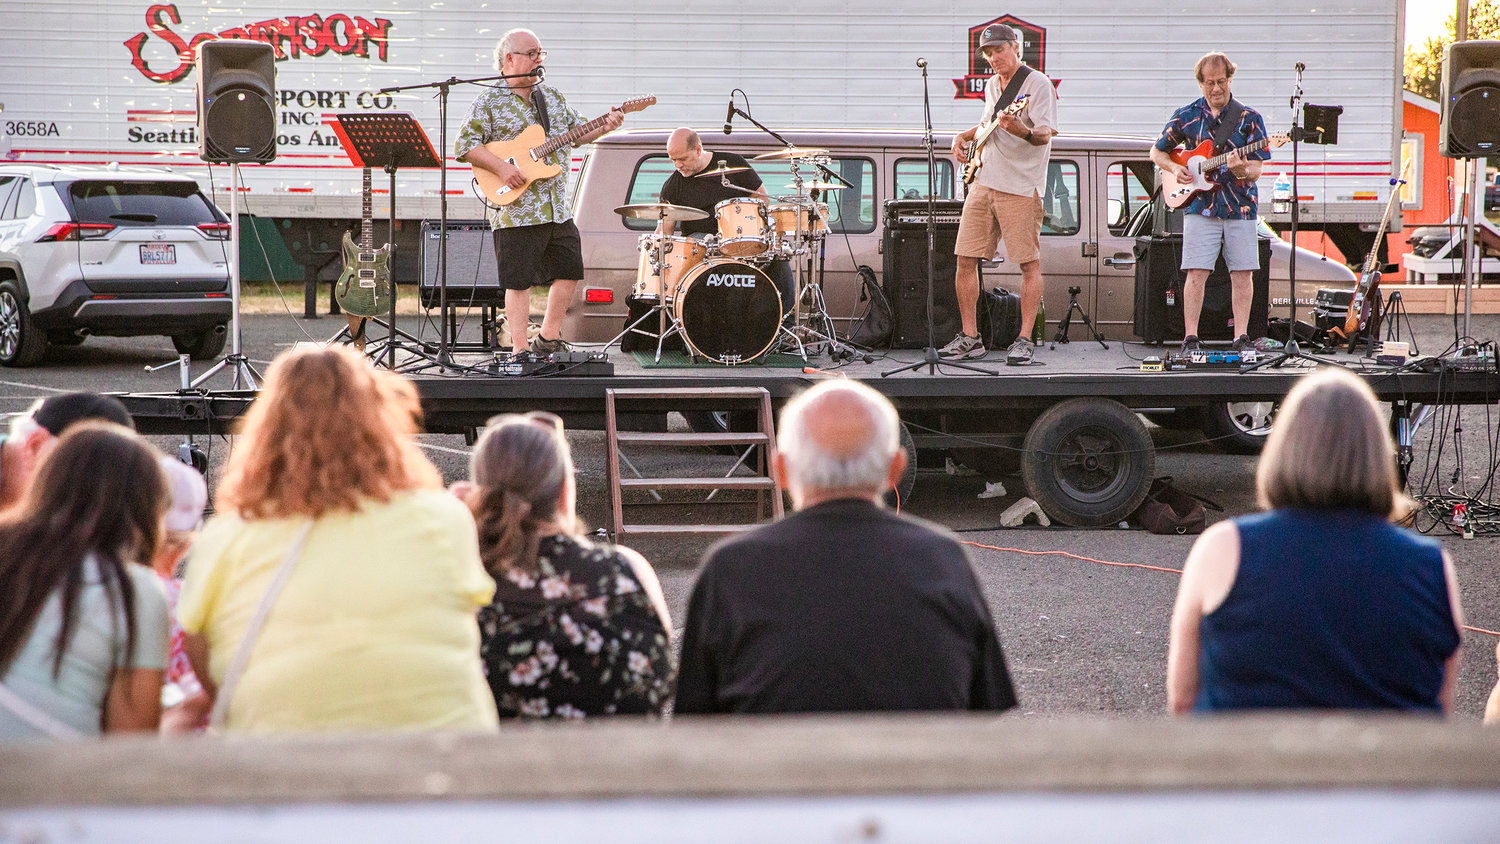 Visitors watch and listen as a band performs Tuesday night at the Southwest Washington Fairgrounds in Centralia.